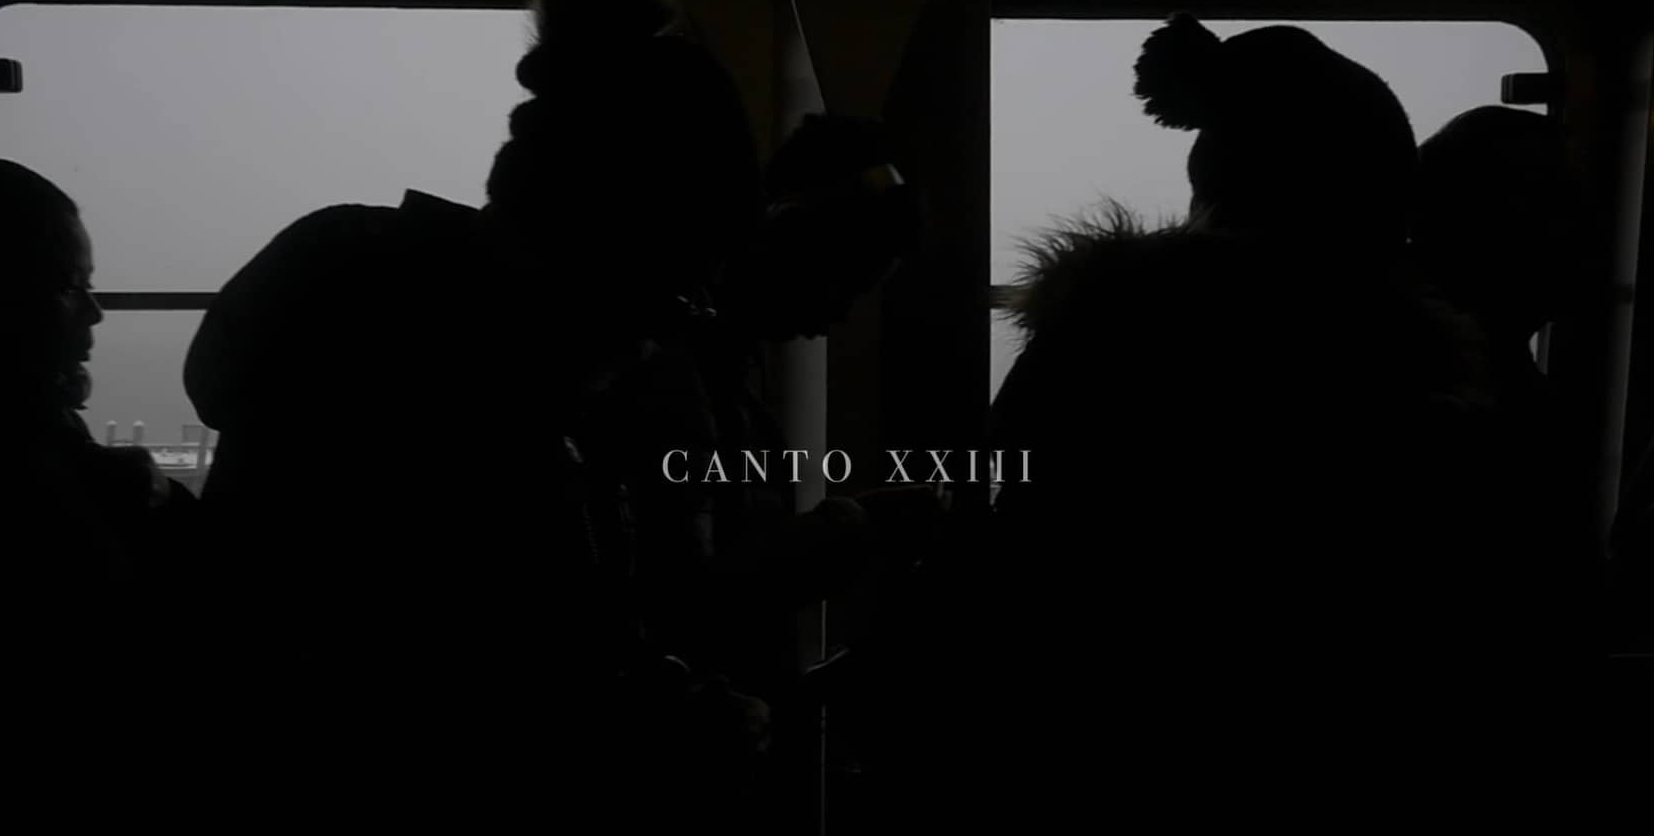 CANTOXIII text over black and white image of human silhouette